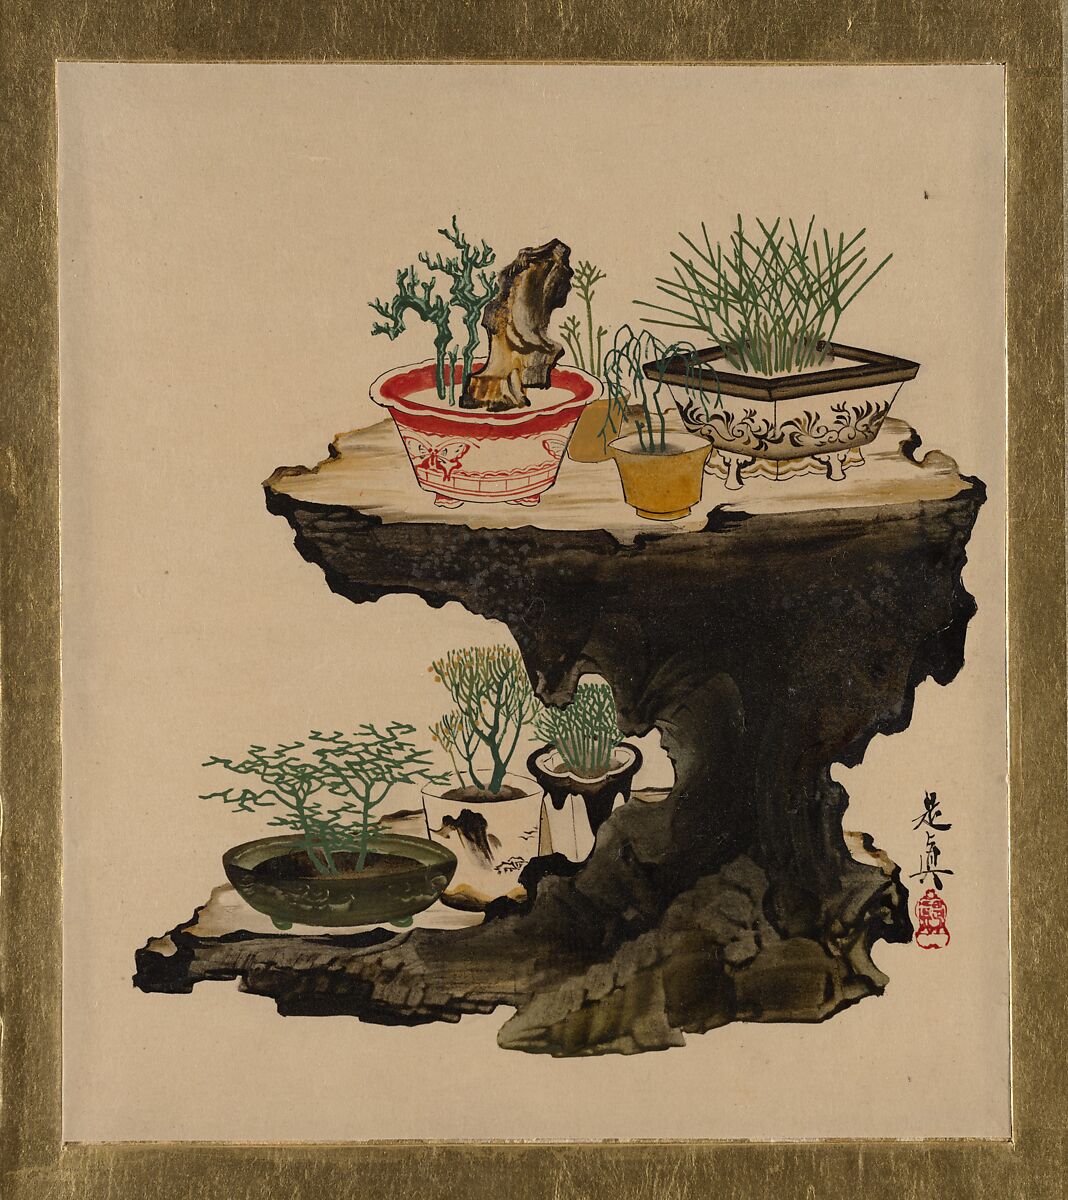 Lacquer Paintings of Various Subjects: Bonsai, Shibata Zeshin (Japanese, 1807–1891), Lacquer on paper, Japan 